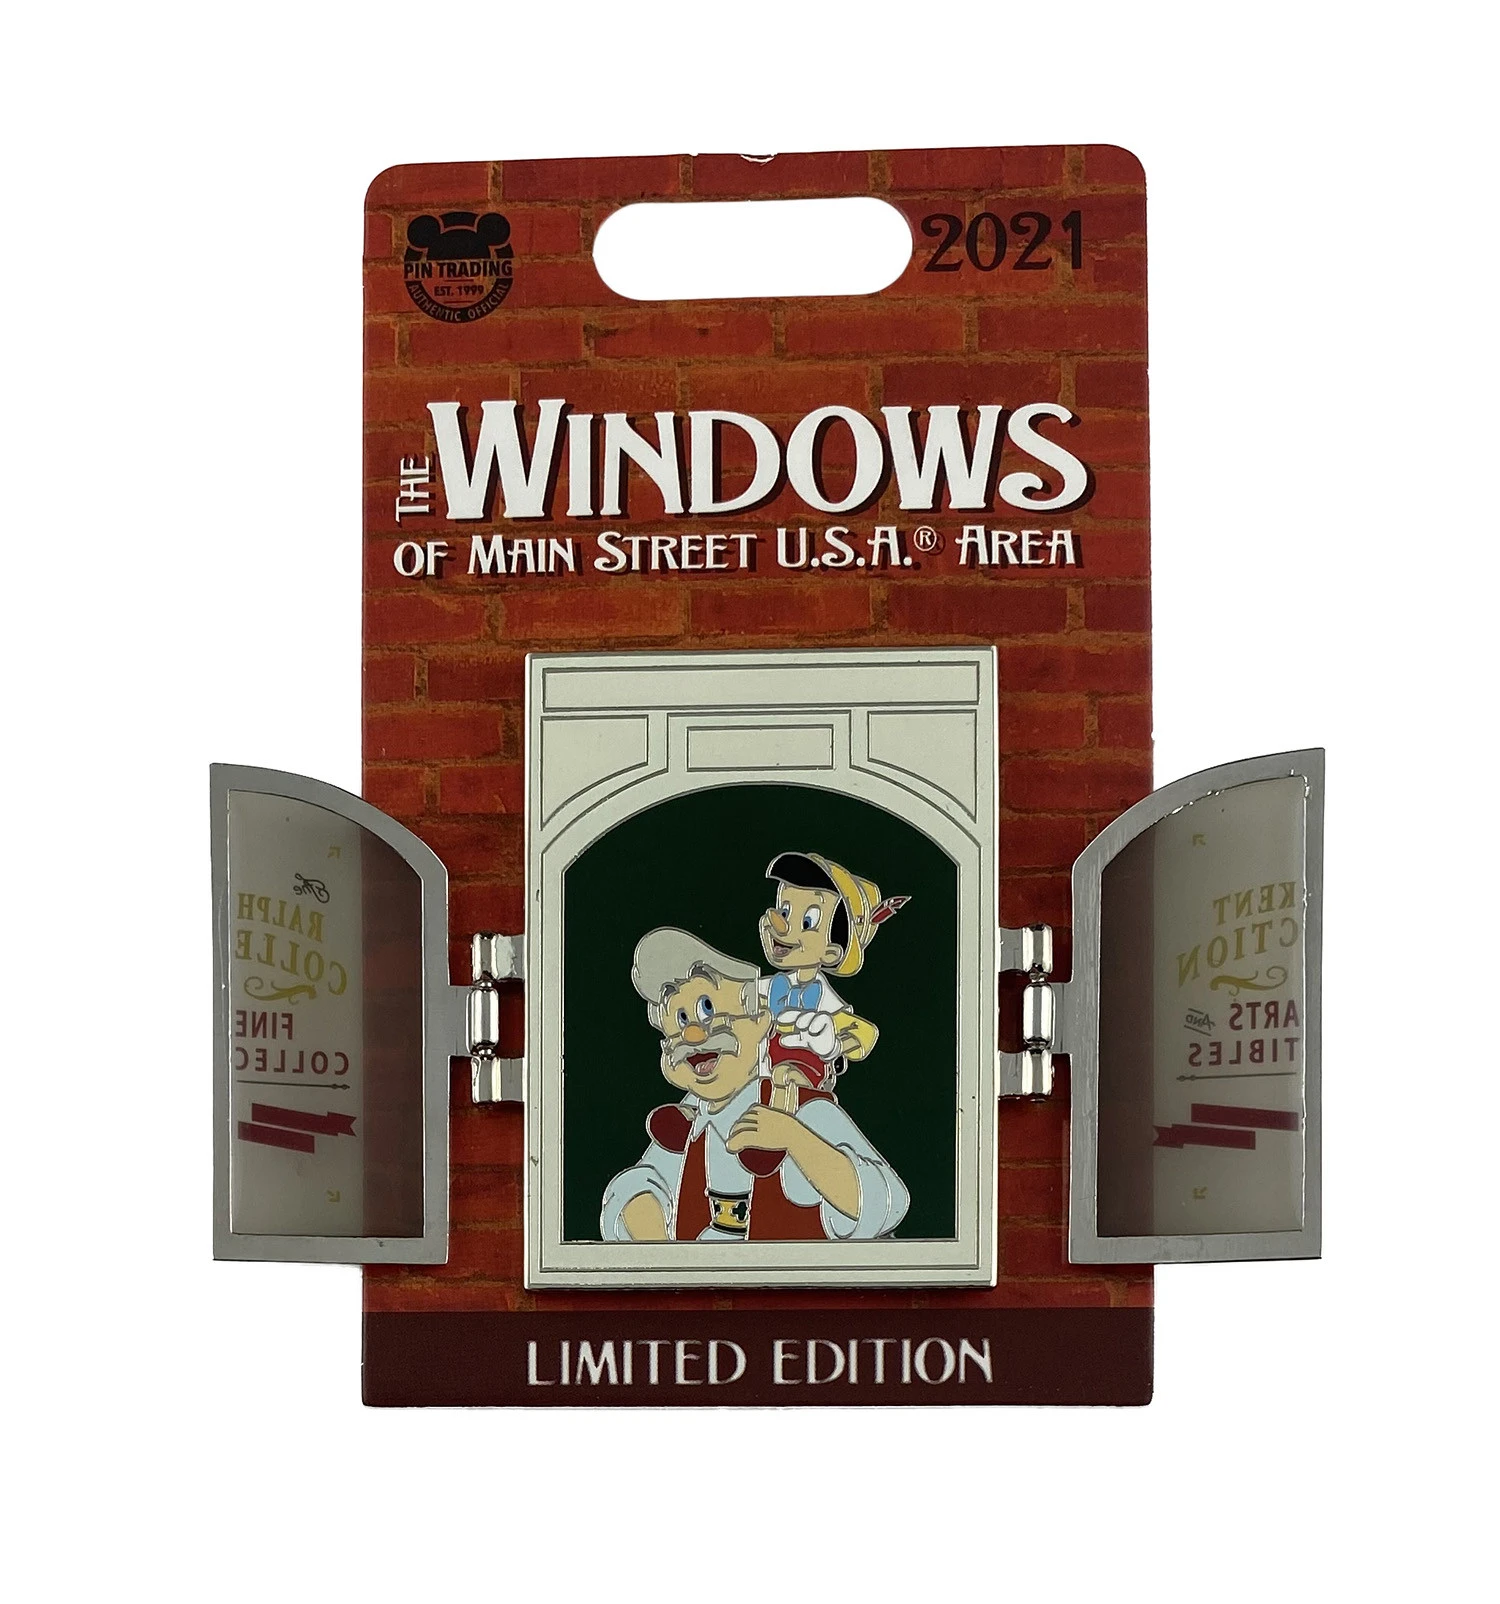 item Disney Pin - The Windows On Main Street U.S.A Series - Pinocchio And Geppetto 153390 2